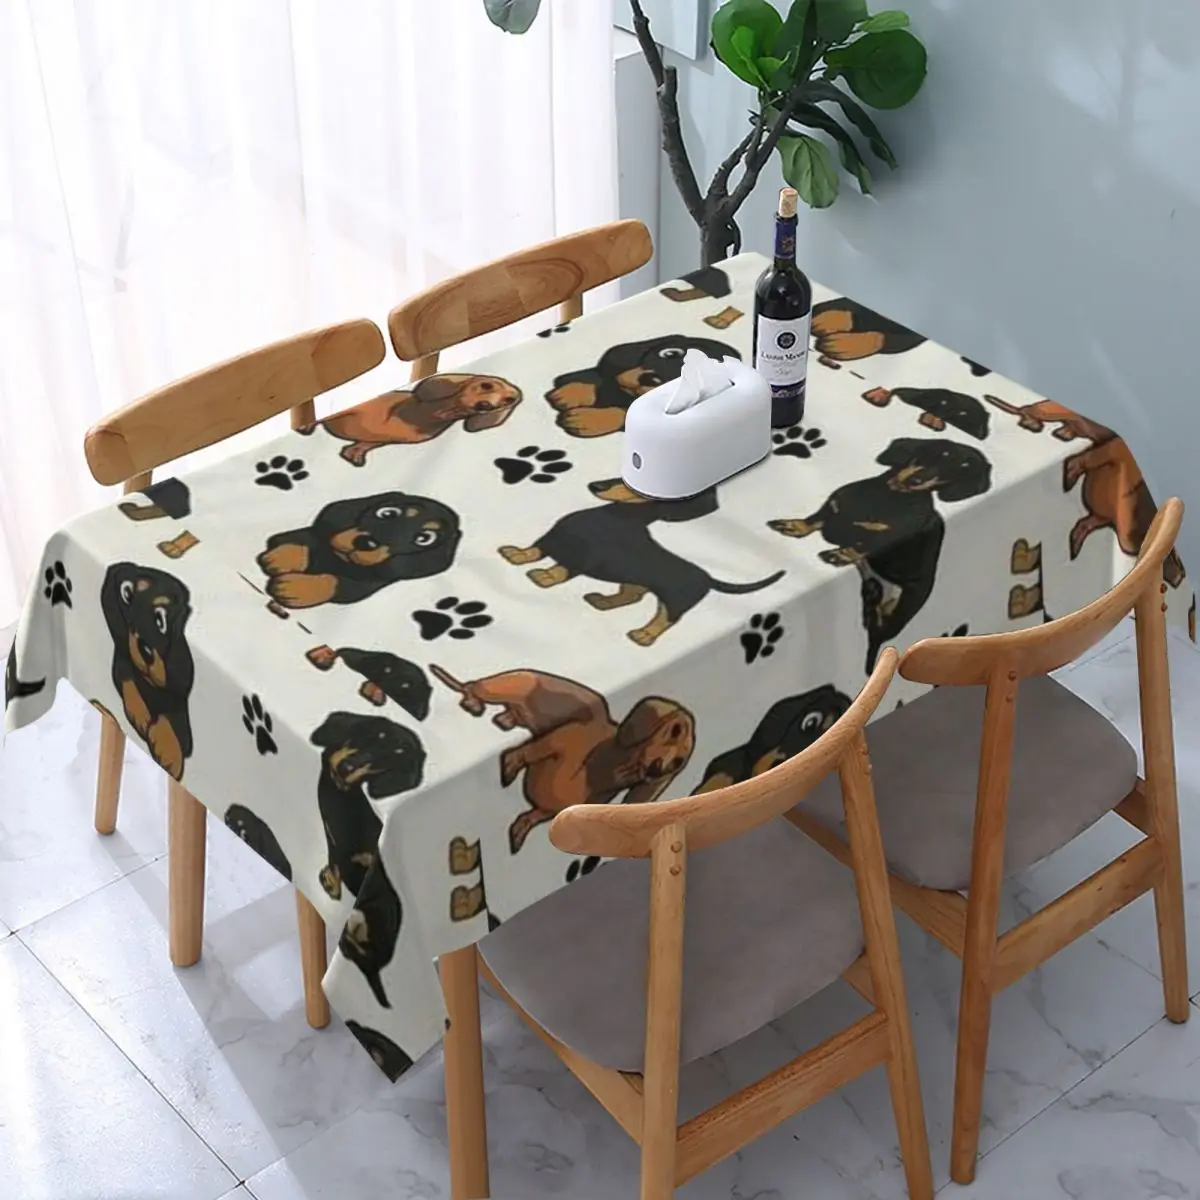 

Dachshund Dog Tablecloth Rectangular Fitted Waterproof Badger Sausage the Wiener Puppy Table Cloth Cover for Kitchen